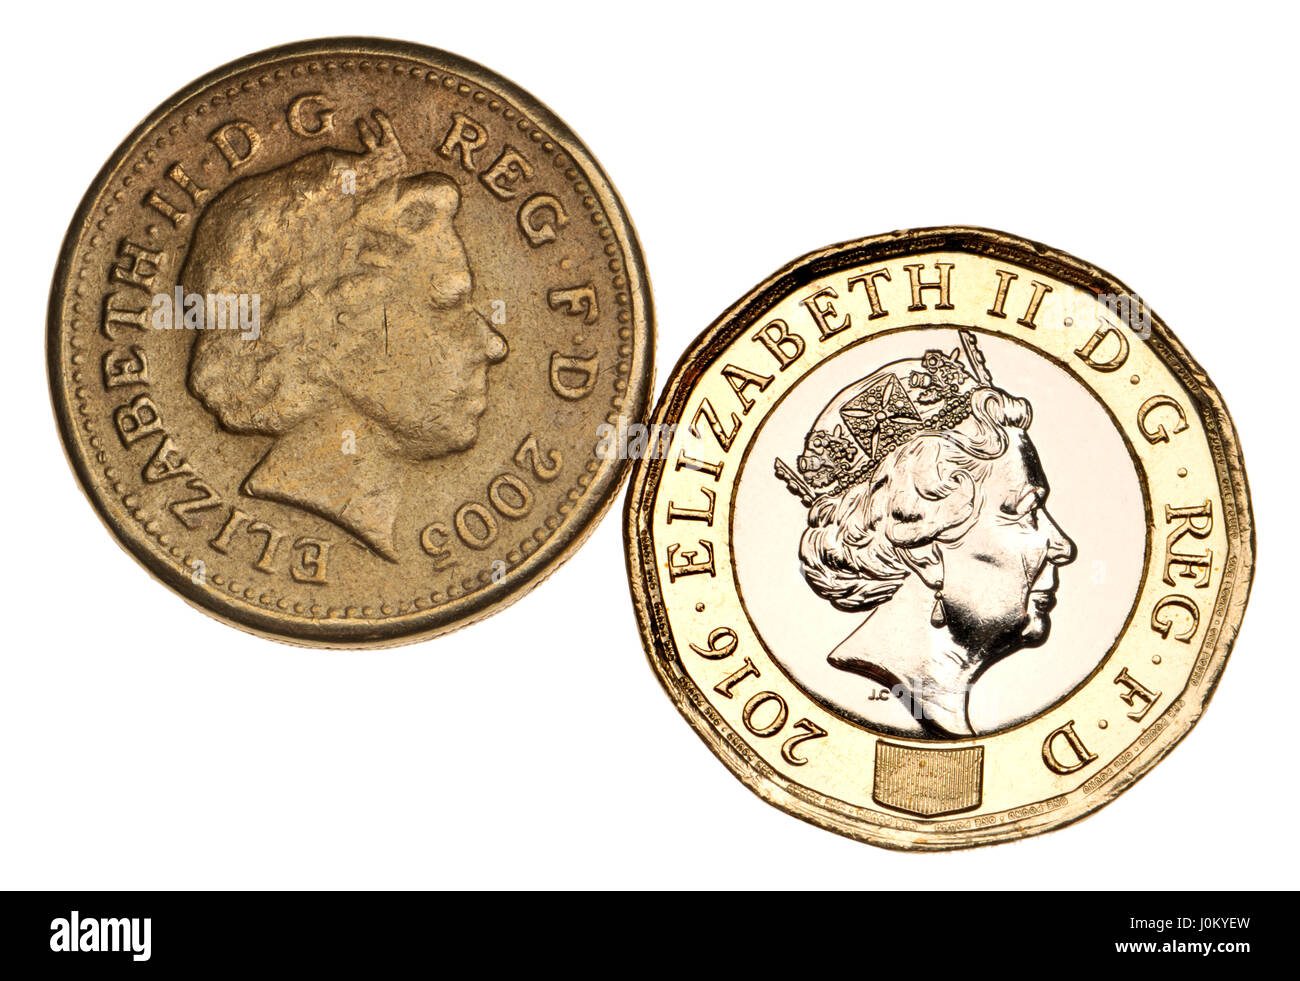 British pound coin - twelve-sided bimetallic 2017 release (dated 2016) next to an old counterfeit coin showing poor definition and detail Stock Photo